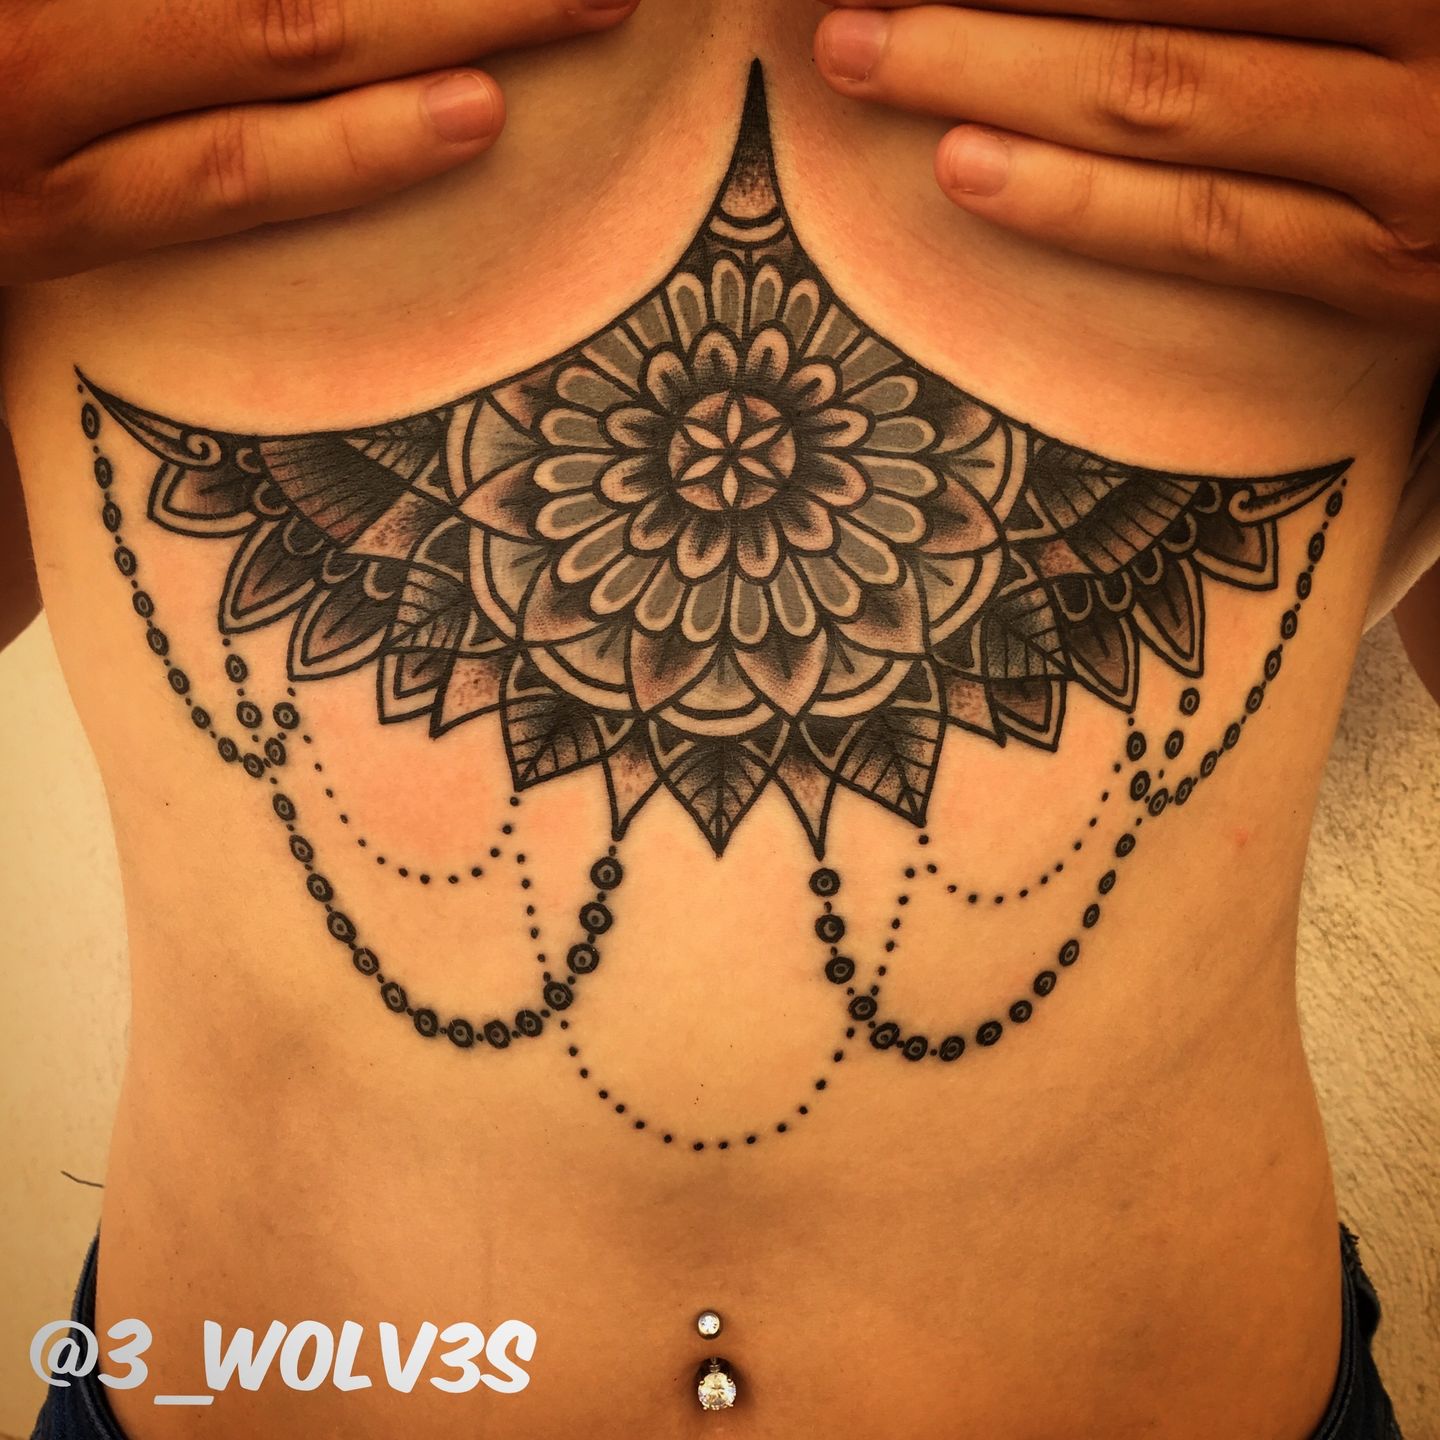 Details more than 72 anime sternum tattoo - in.cdgdbentre